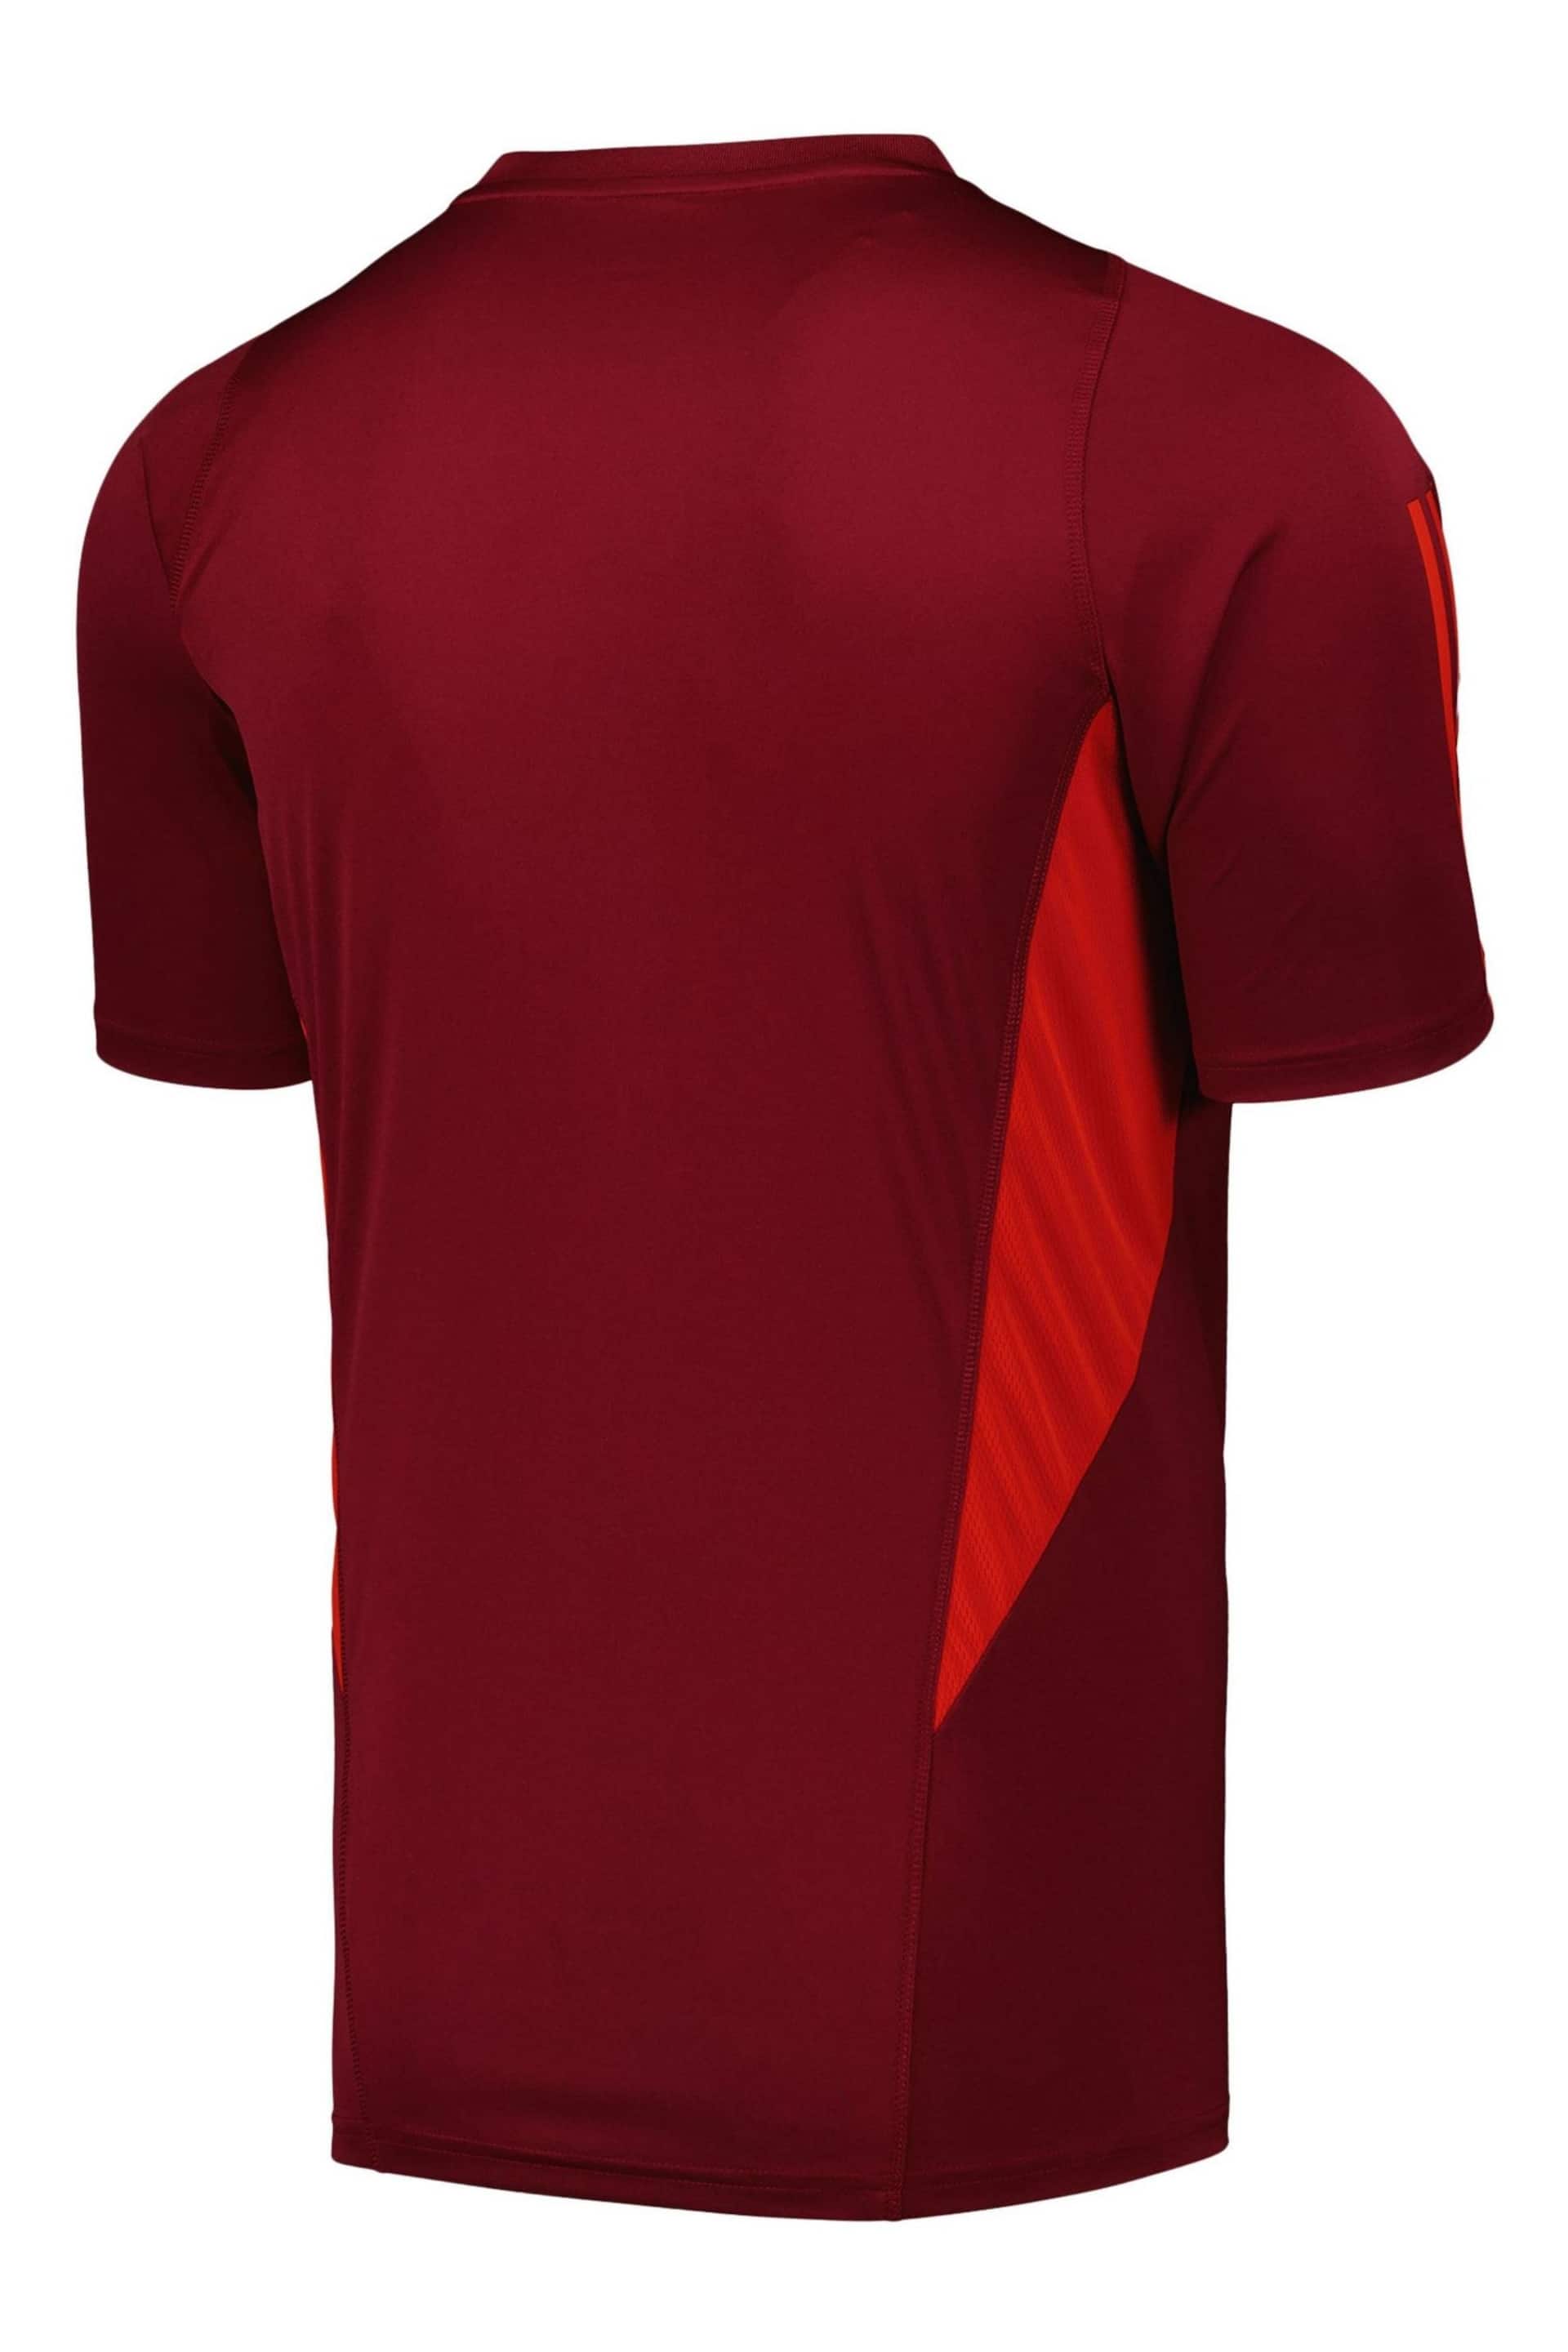 adidas Red Manchester United European Training Jersey - Image 2 of 3